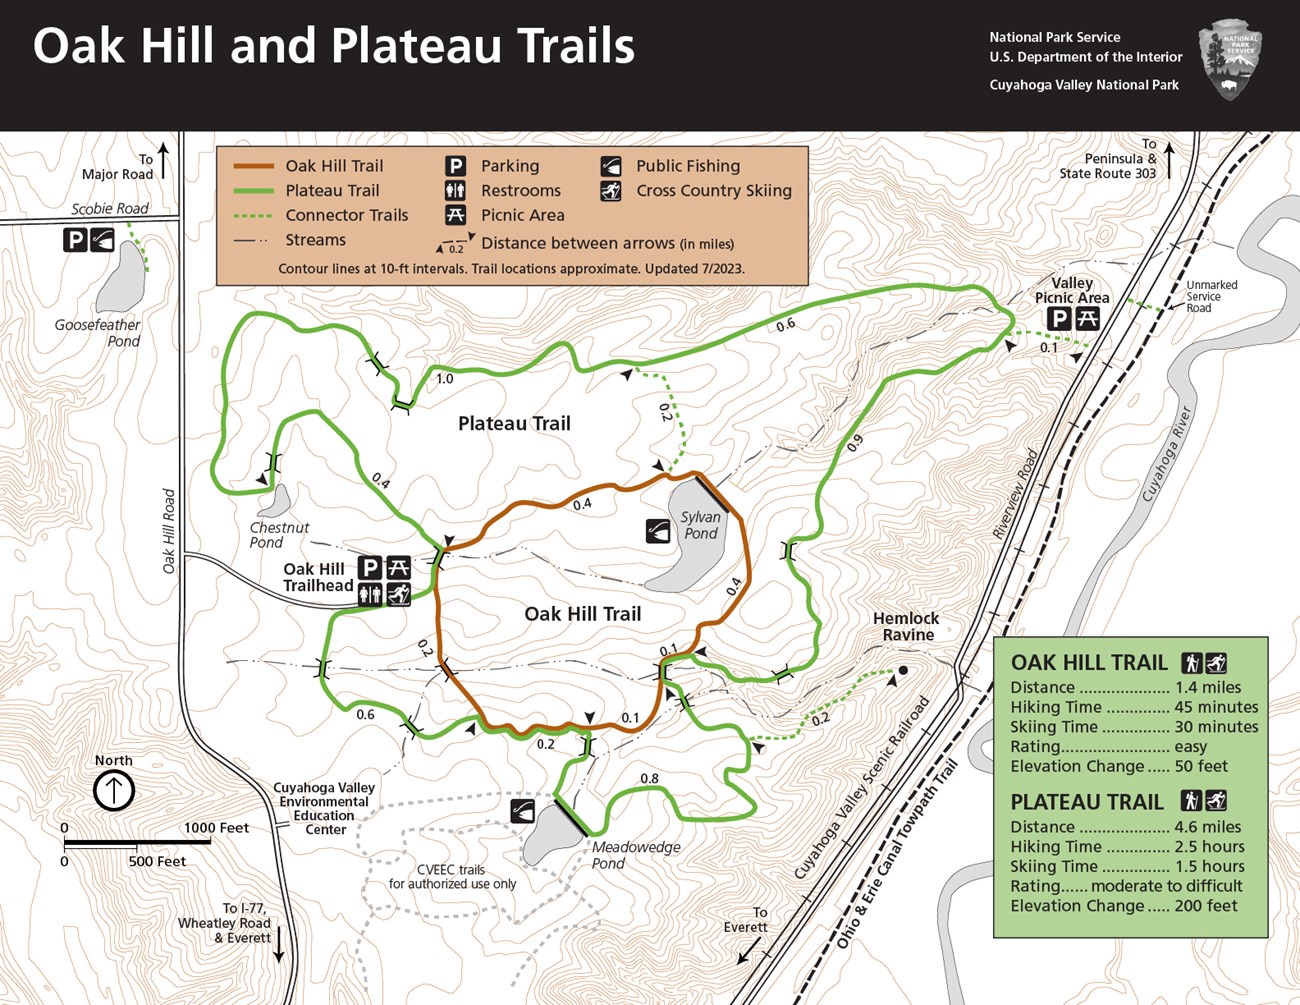 A map of the 1.8 mile Oak Hill Trail and the 4.6 mile Plateau trail. Both are loop trails off of Oak Hill Road at Oak Hill Trailhead. The trailhead has parking, restrooms, picnic tables, and the trails can be used to cross country ski in the winter.